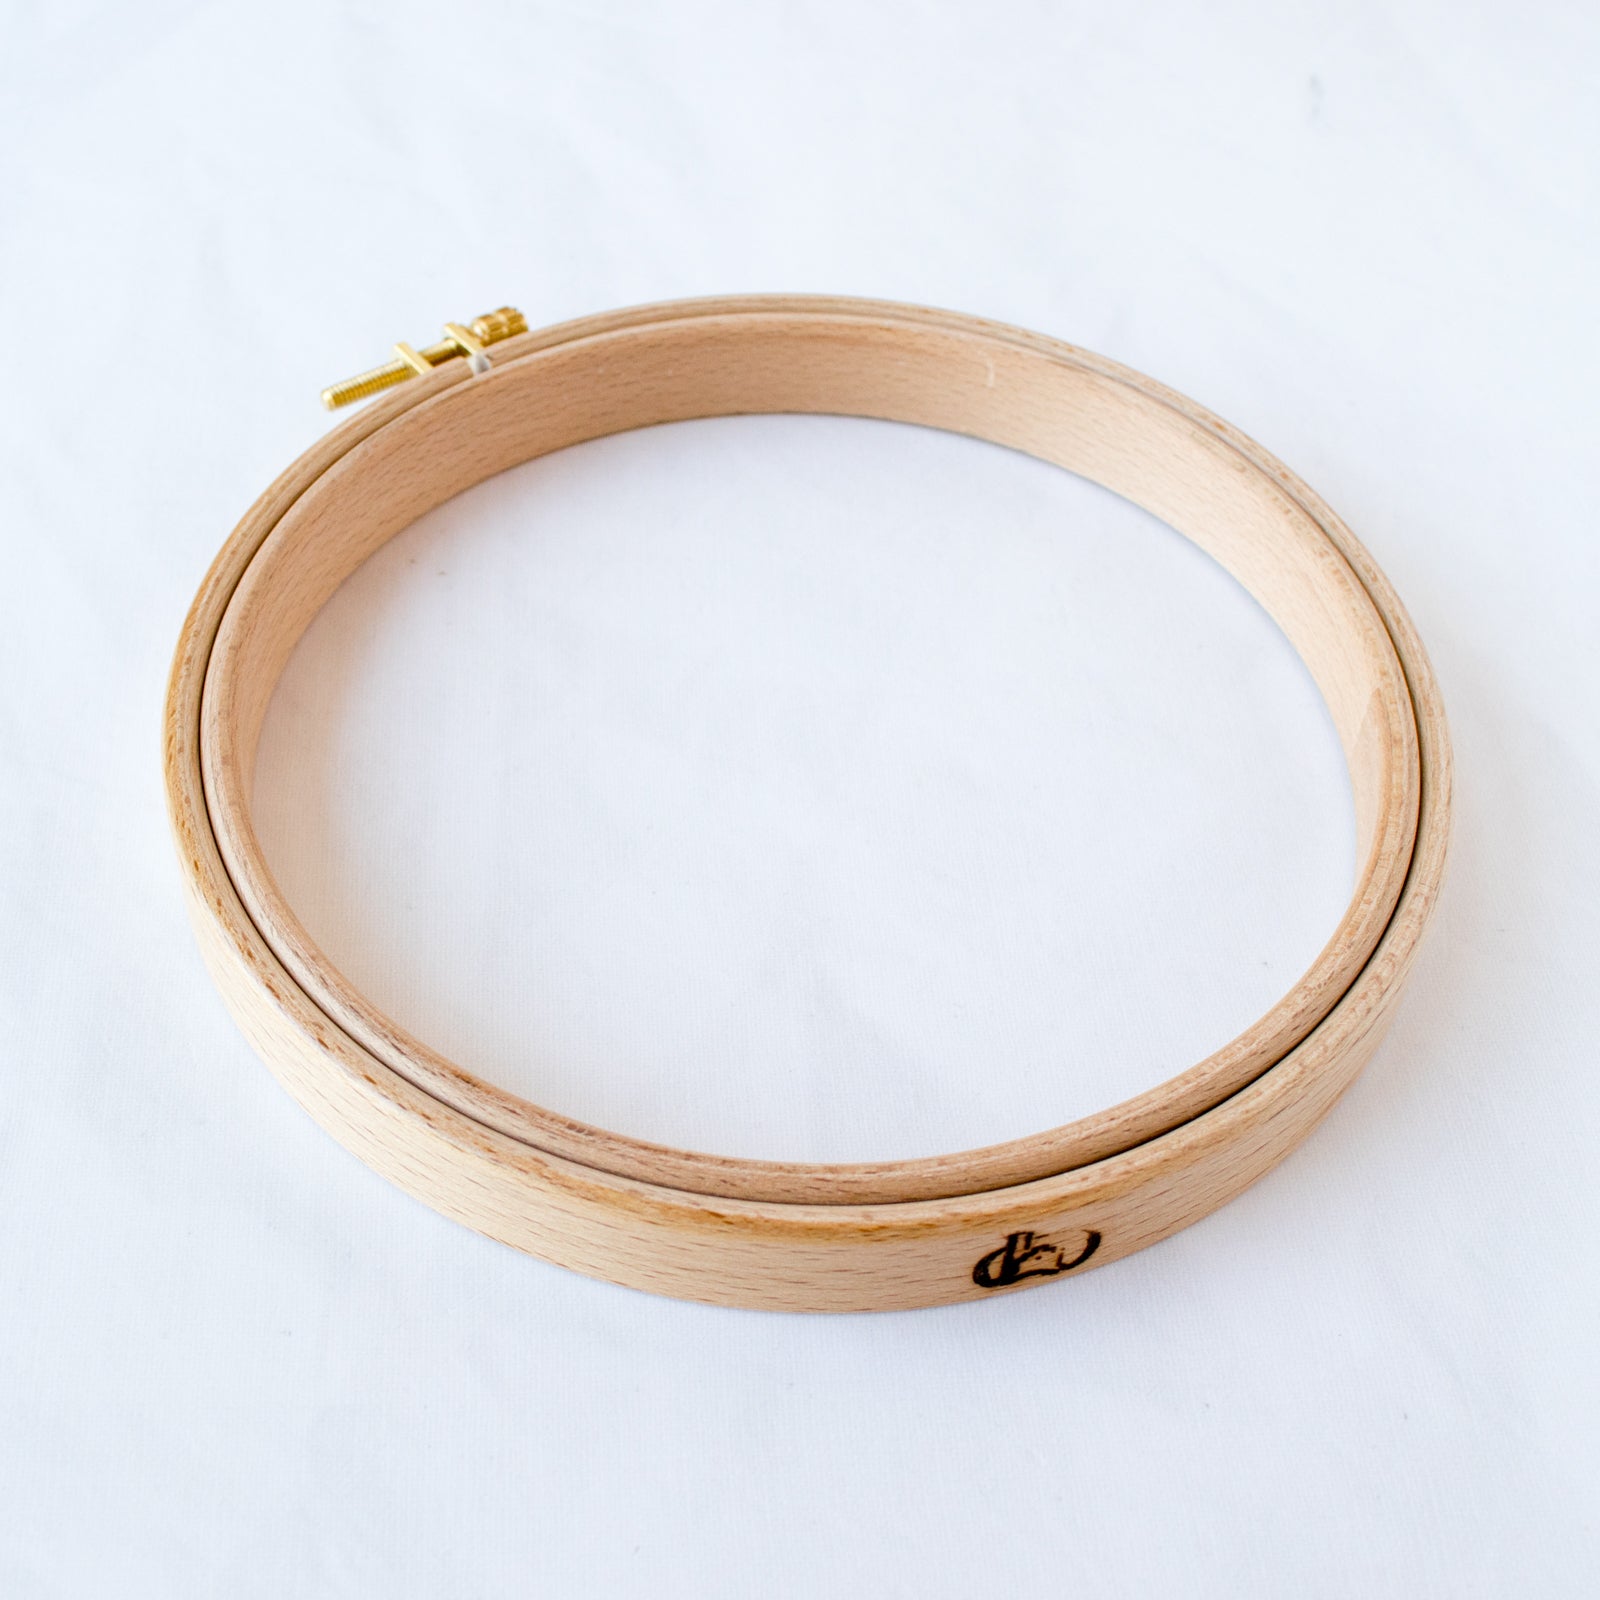 JL Wooden Embroidery Frames/Ring/Hoop Set of 3 pcs: 5,7,9 for DIY,  Needlecraft, Cross Stitch : Amazon.in: Home & Kitchen